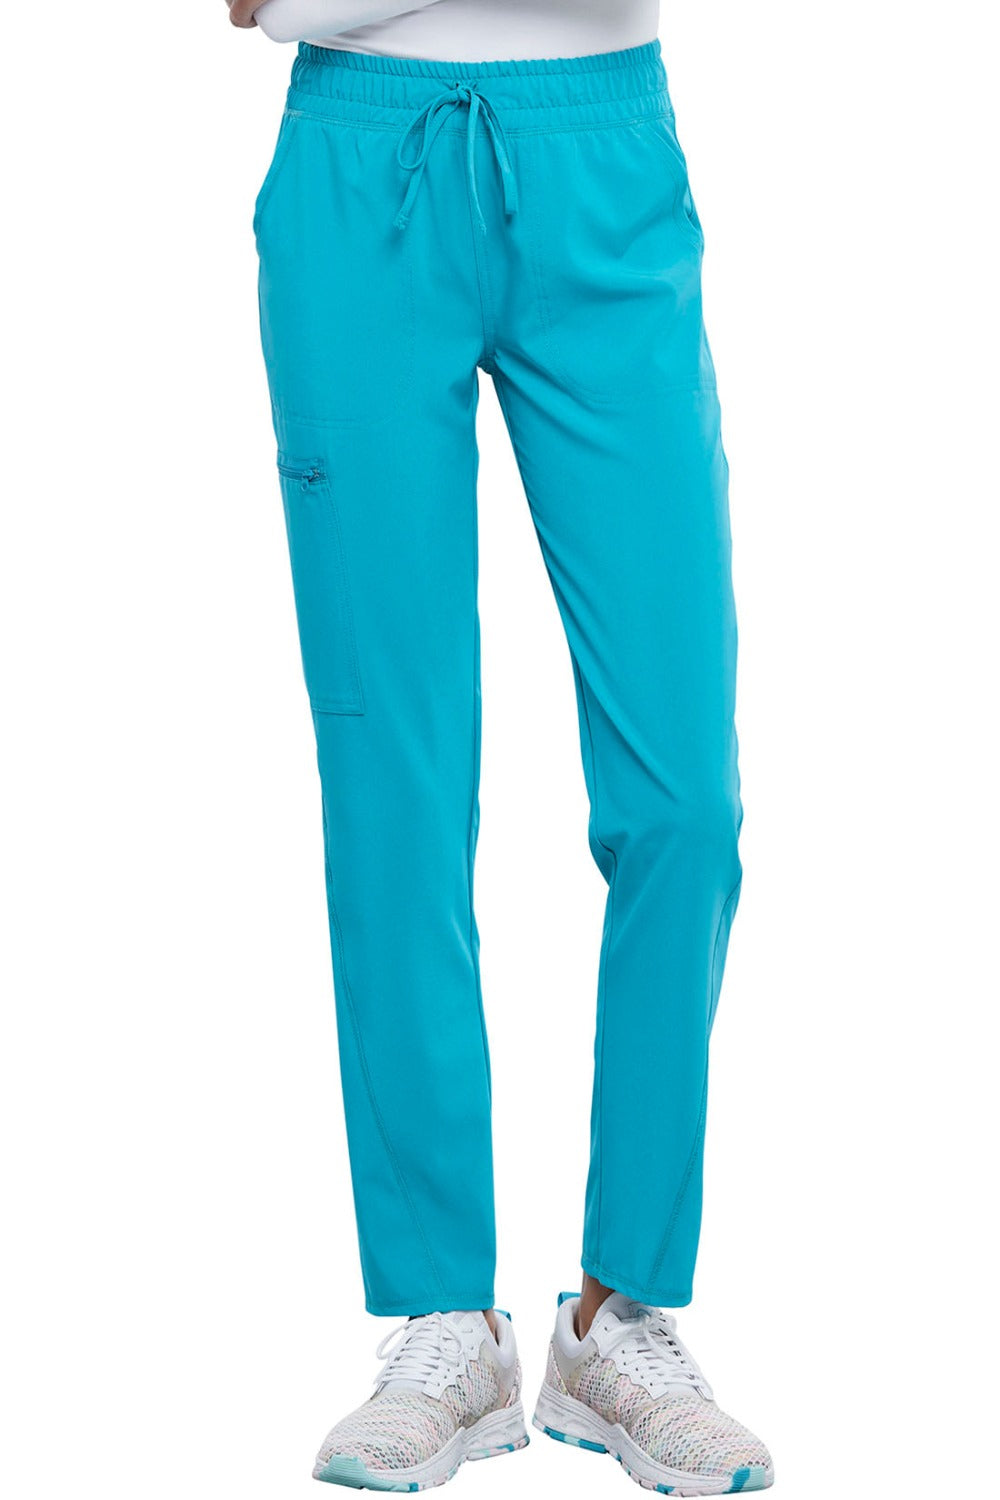 Cherokee Allura Tall Scrub Pant Mid Rise Tapered Leg Drawstring in Teal Blue at Parker's Clothing and Shoes.